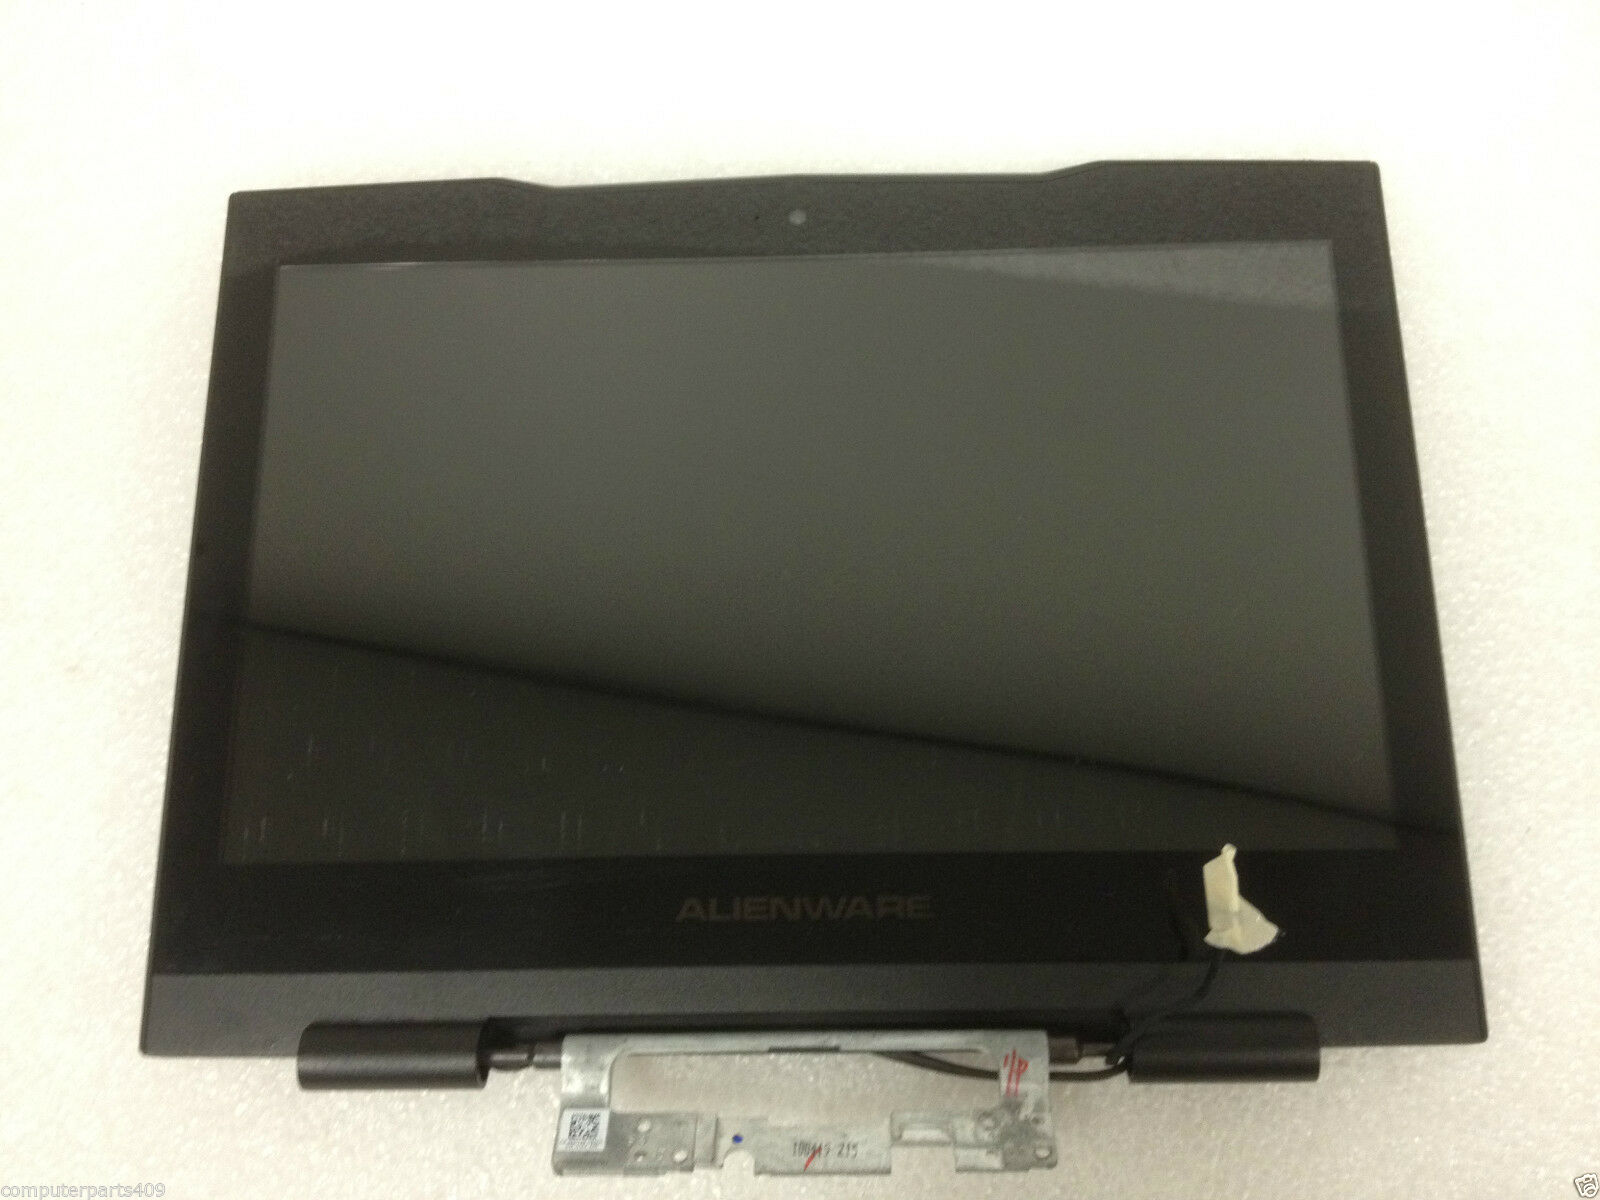 Dell Alienware M11x 11.6" LCD Screen -Complete Display Assembly F8W3Y- Black